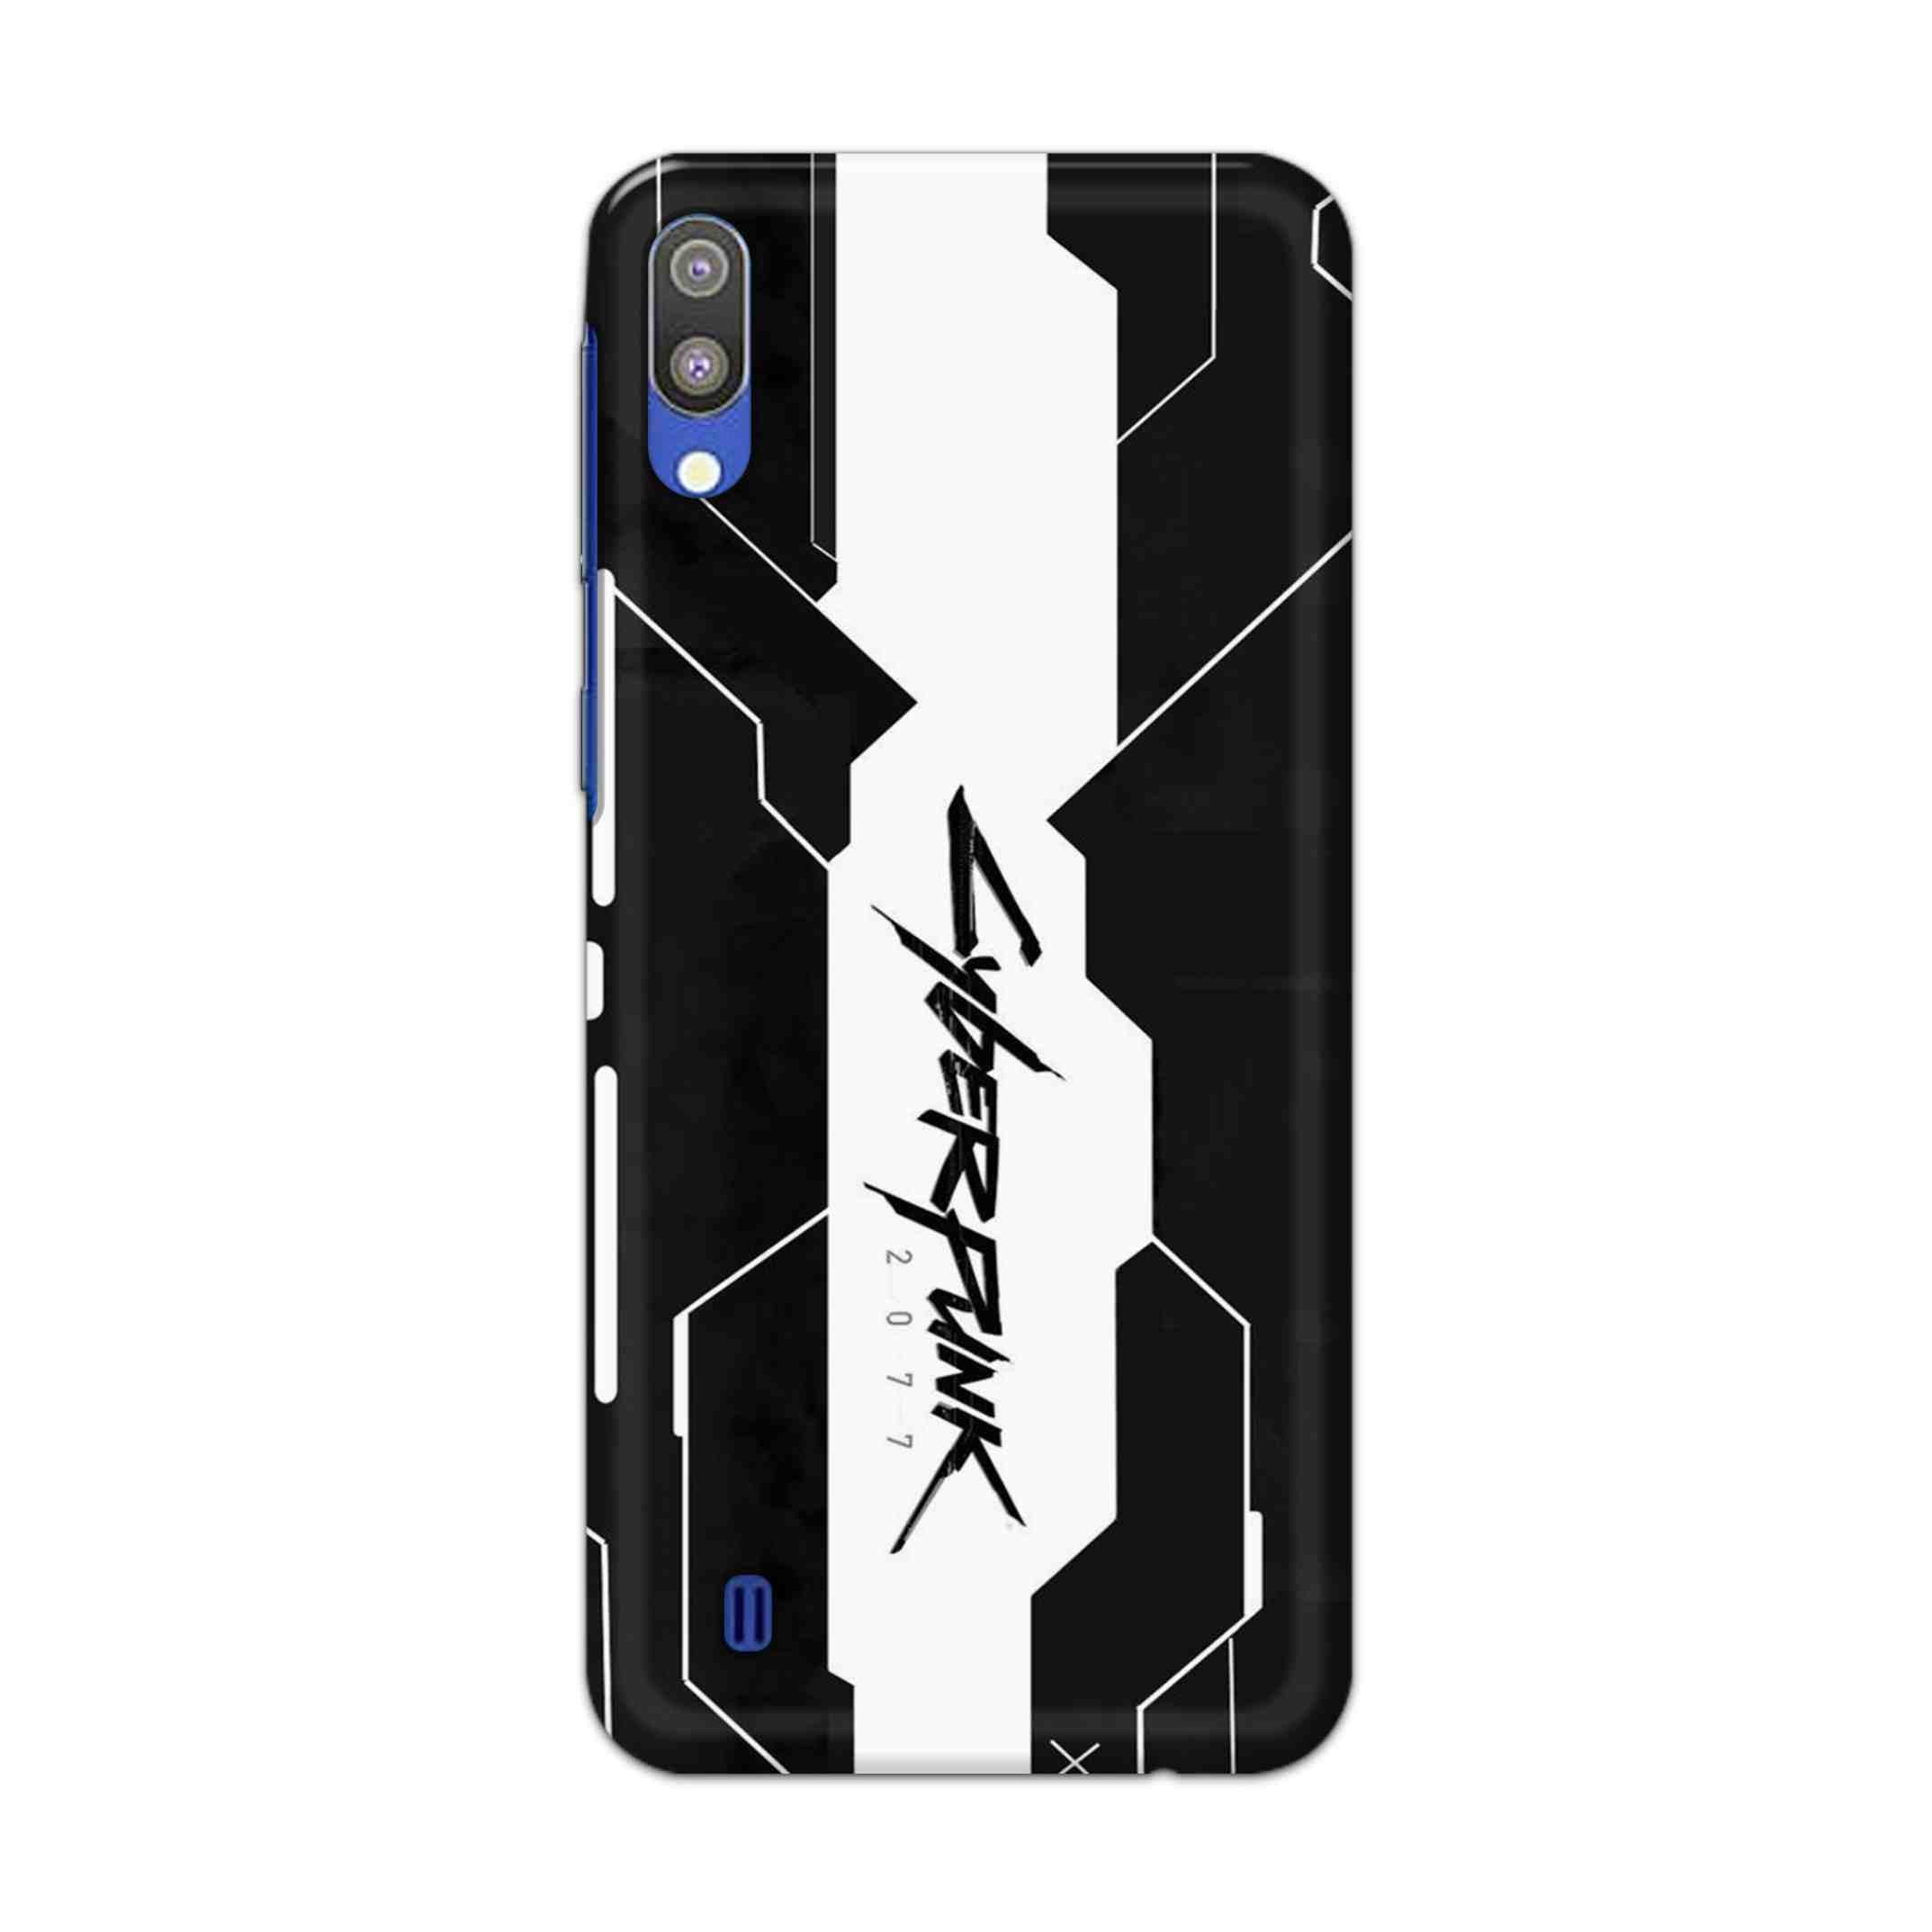 Buy Cyberpunk 2077 Art Hard Back Mobile Phone Case Cover For Samsung Galaxy M10 Online